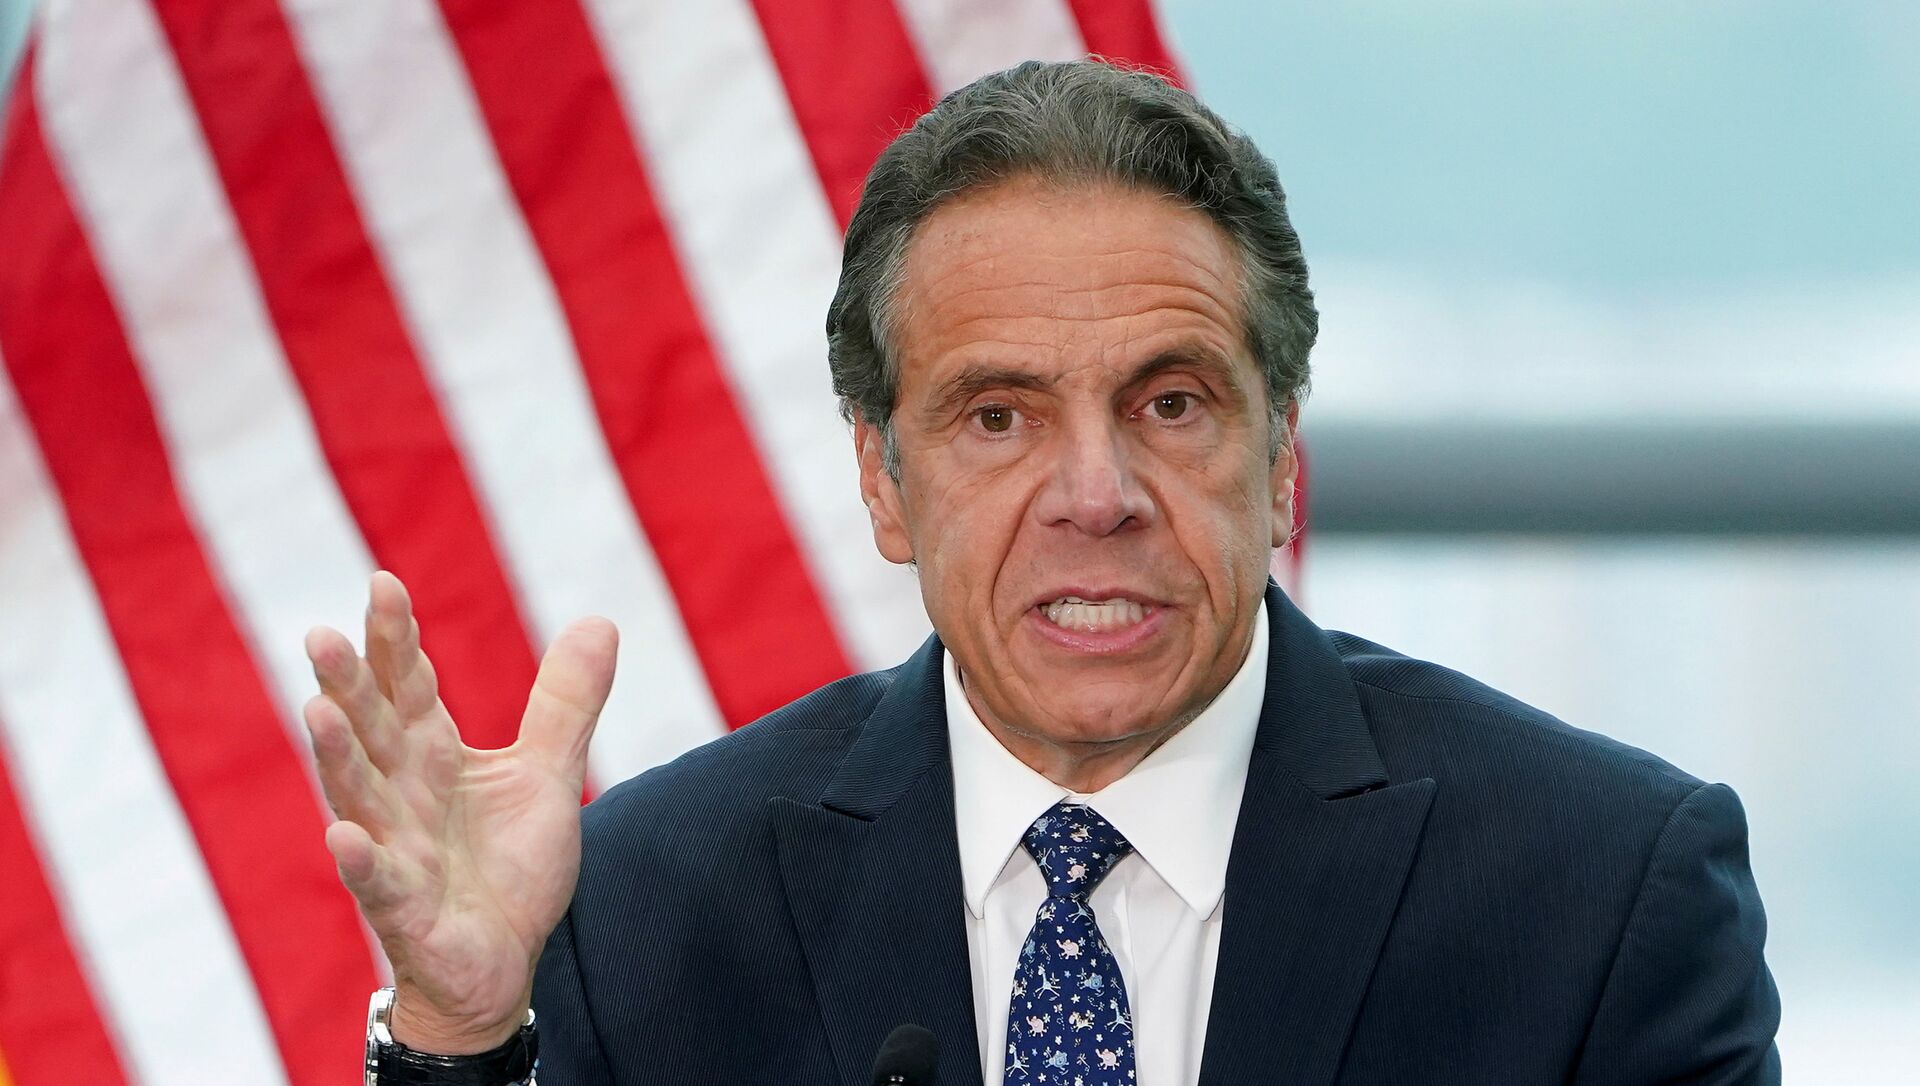 New York Governor Andrew Cuomo gives a press conference in the Manhattan borough of New York City, New York, U.S., June 2, 2021 - Sputnik International, 1920, 04.08.2021